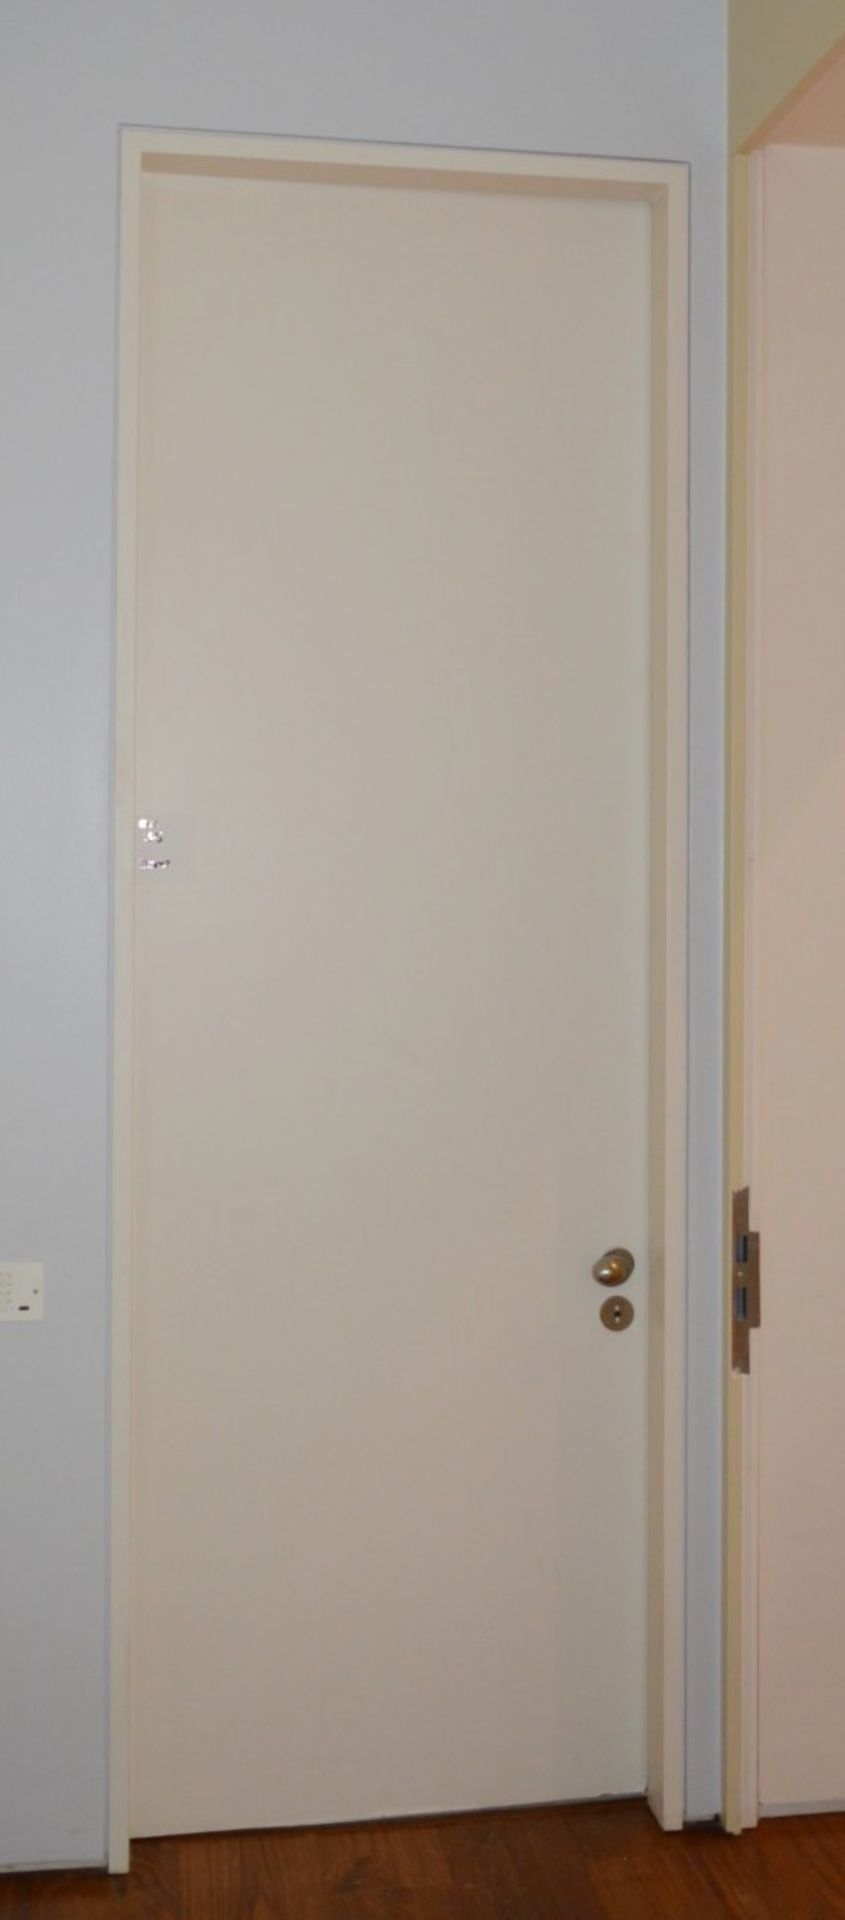 1 x Fire Resistant Internal Door - Fitted With Stylish Chrome Door Knobs, Triple Hinges and